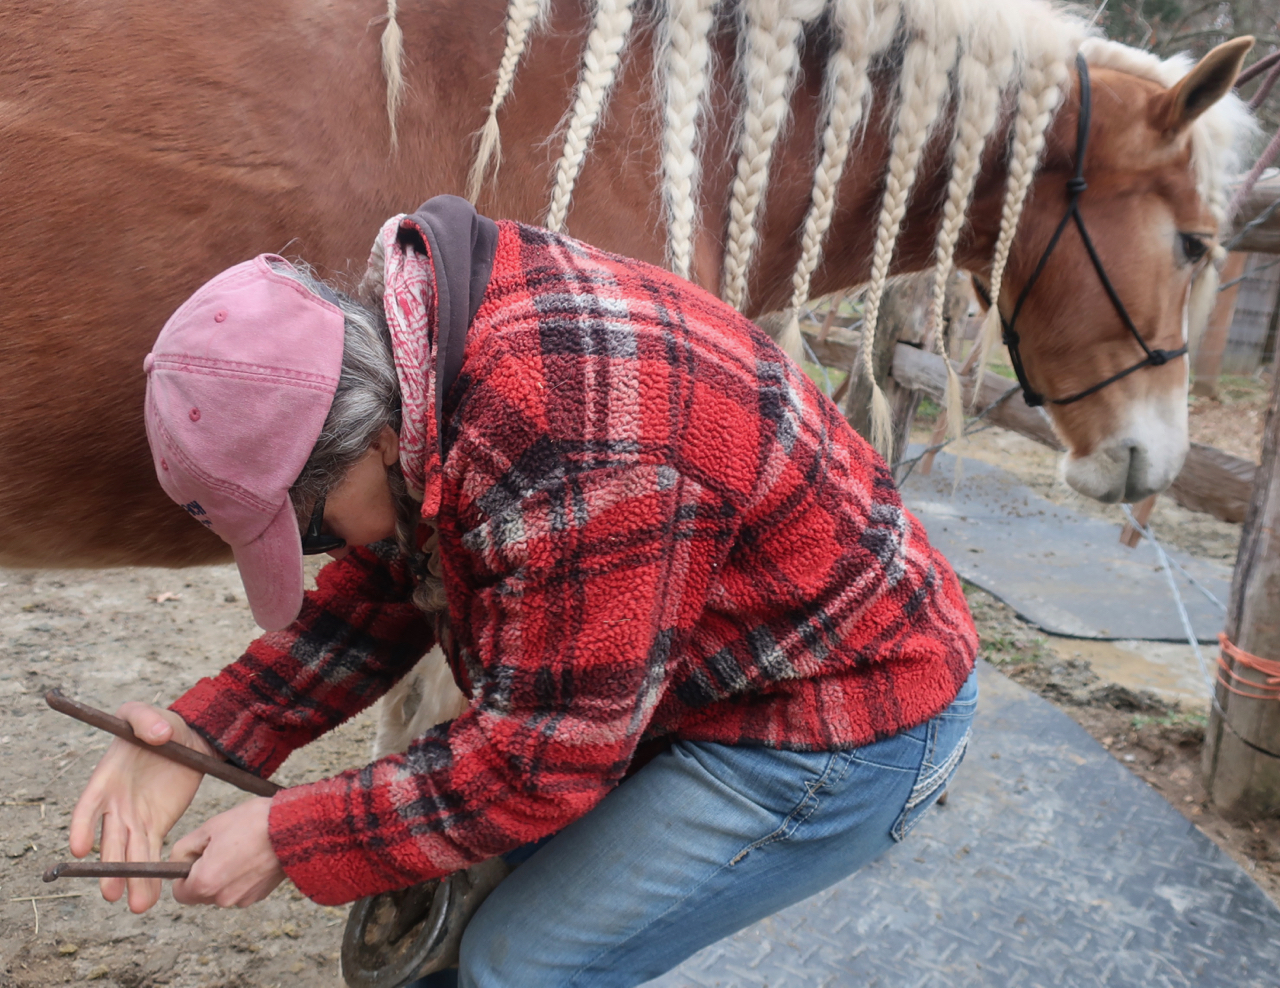 Measuring Pie for Hoof Boots (Part 2 of the 3 Part Series on Transitioning to Hoof Boots)